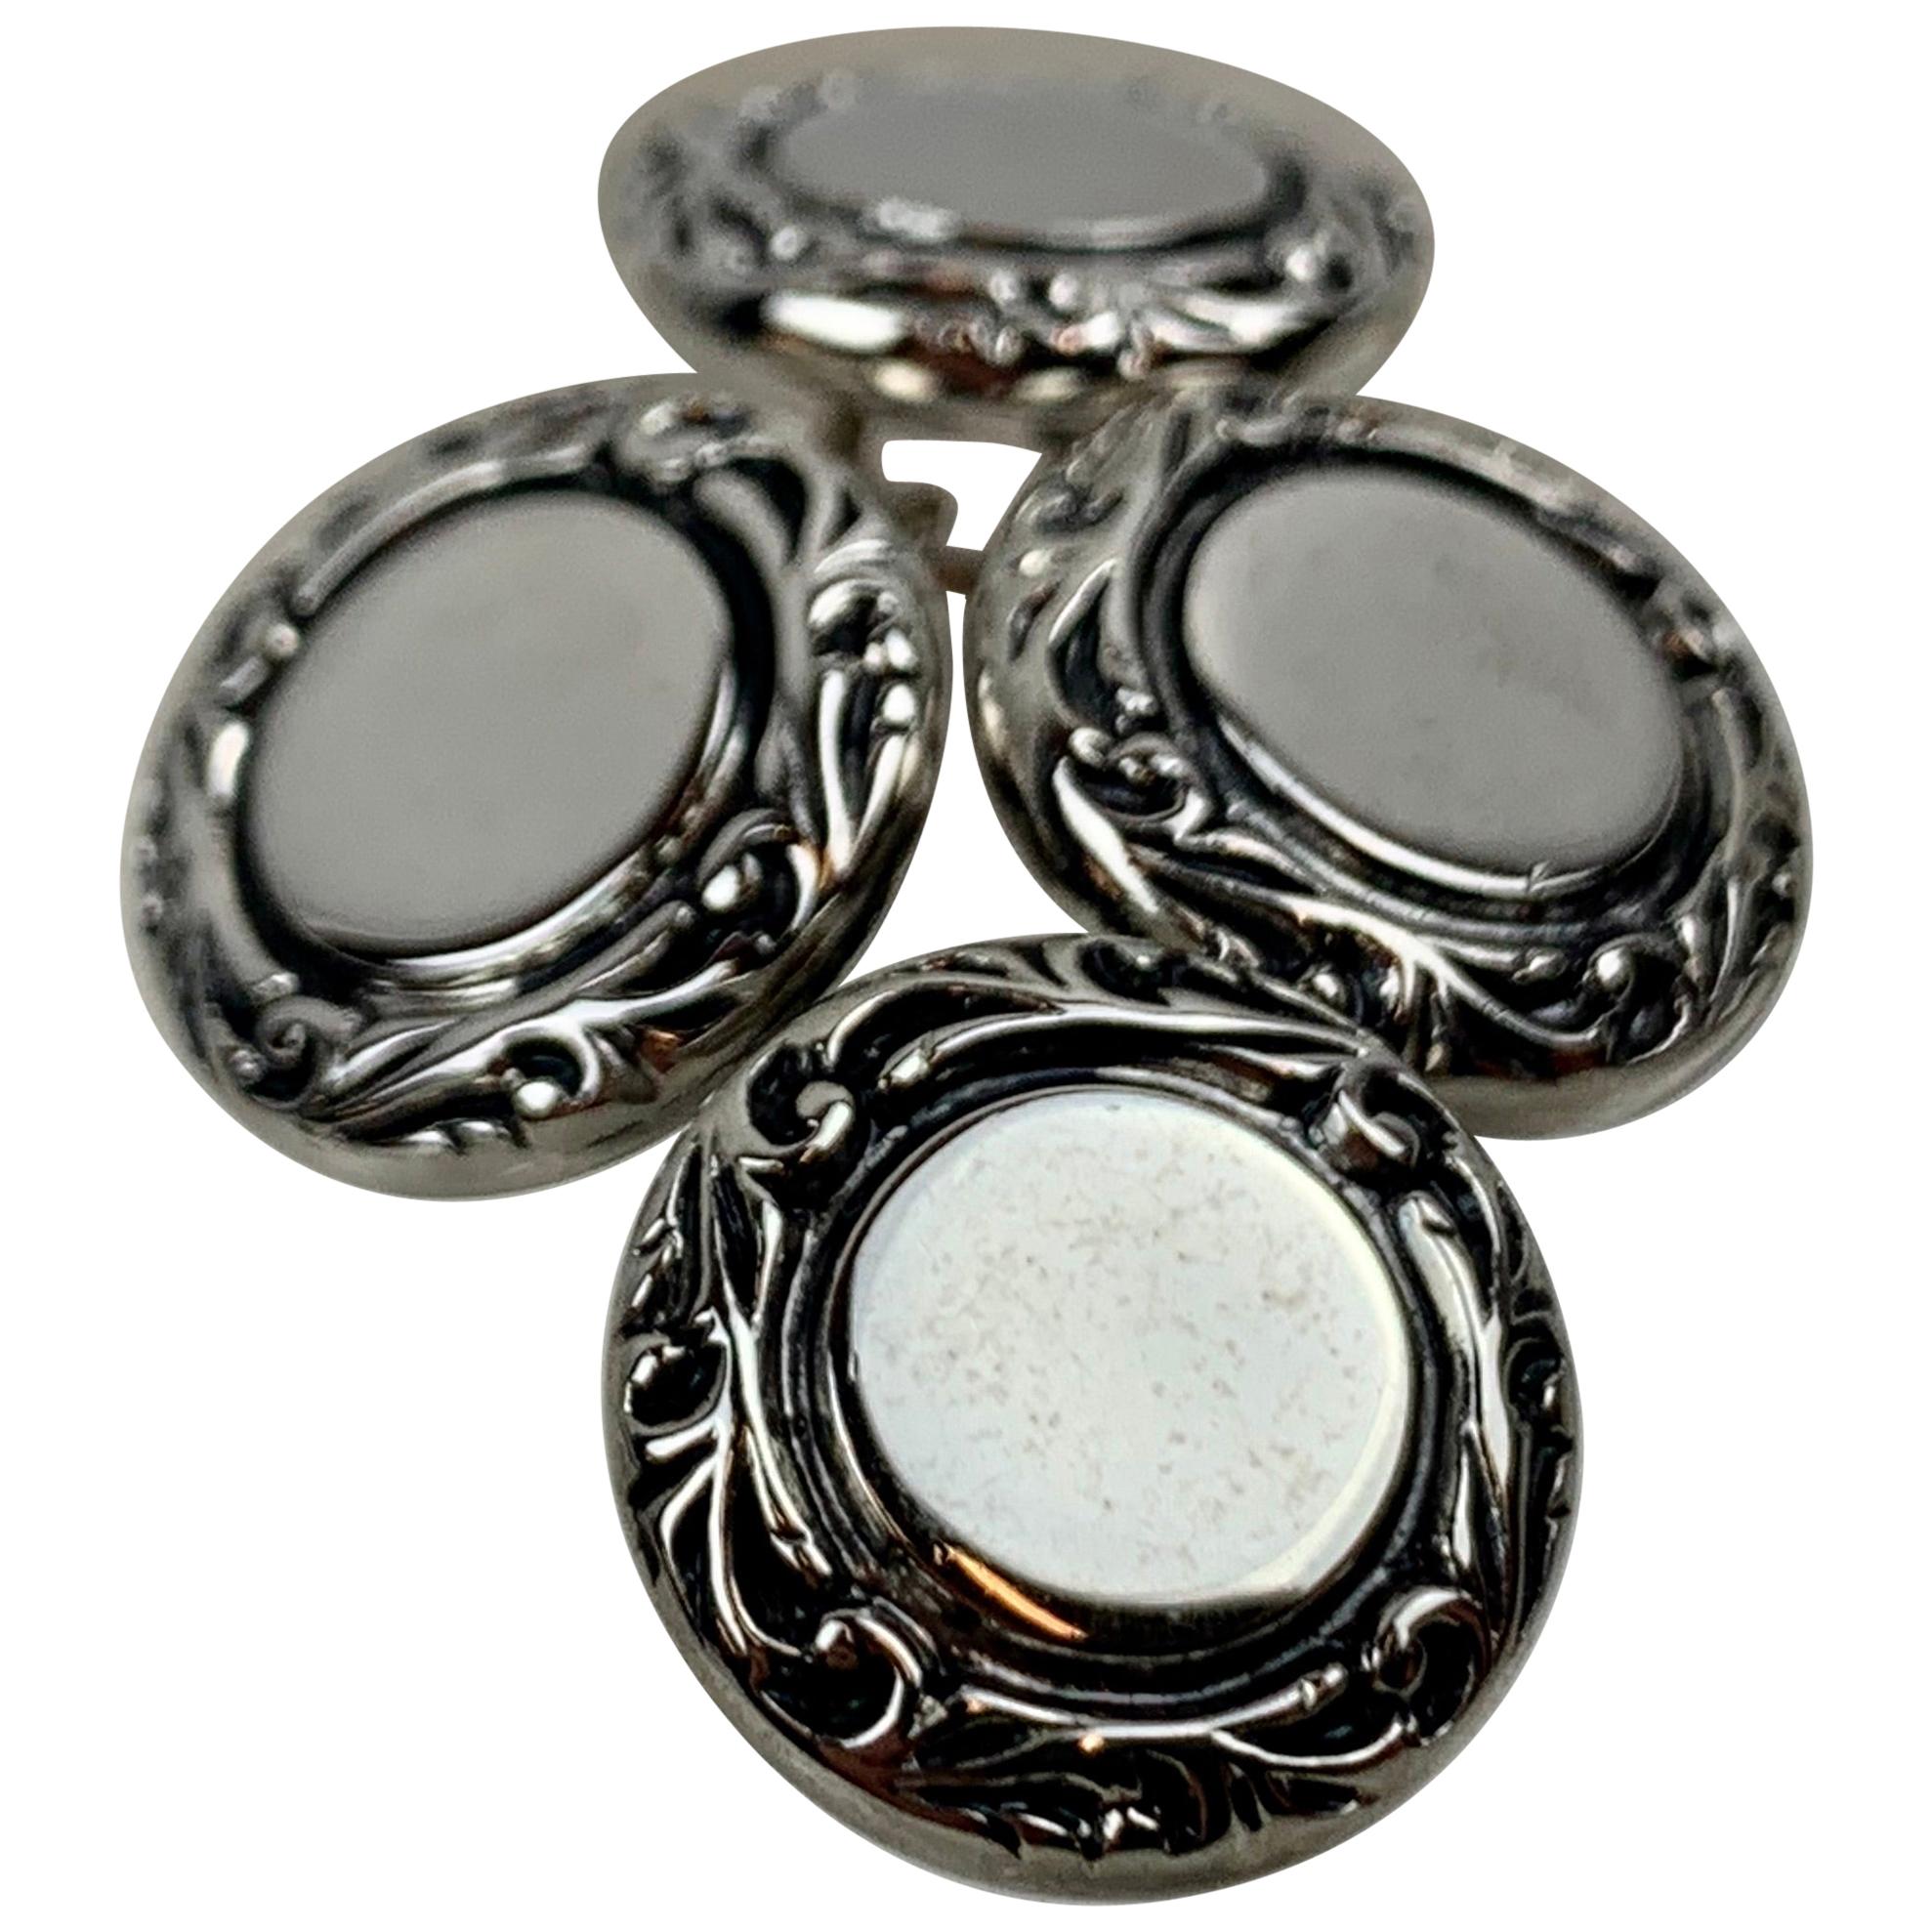 A Pair of Double Round Silver Tone Cufflinks with Scrolled Raised Borders